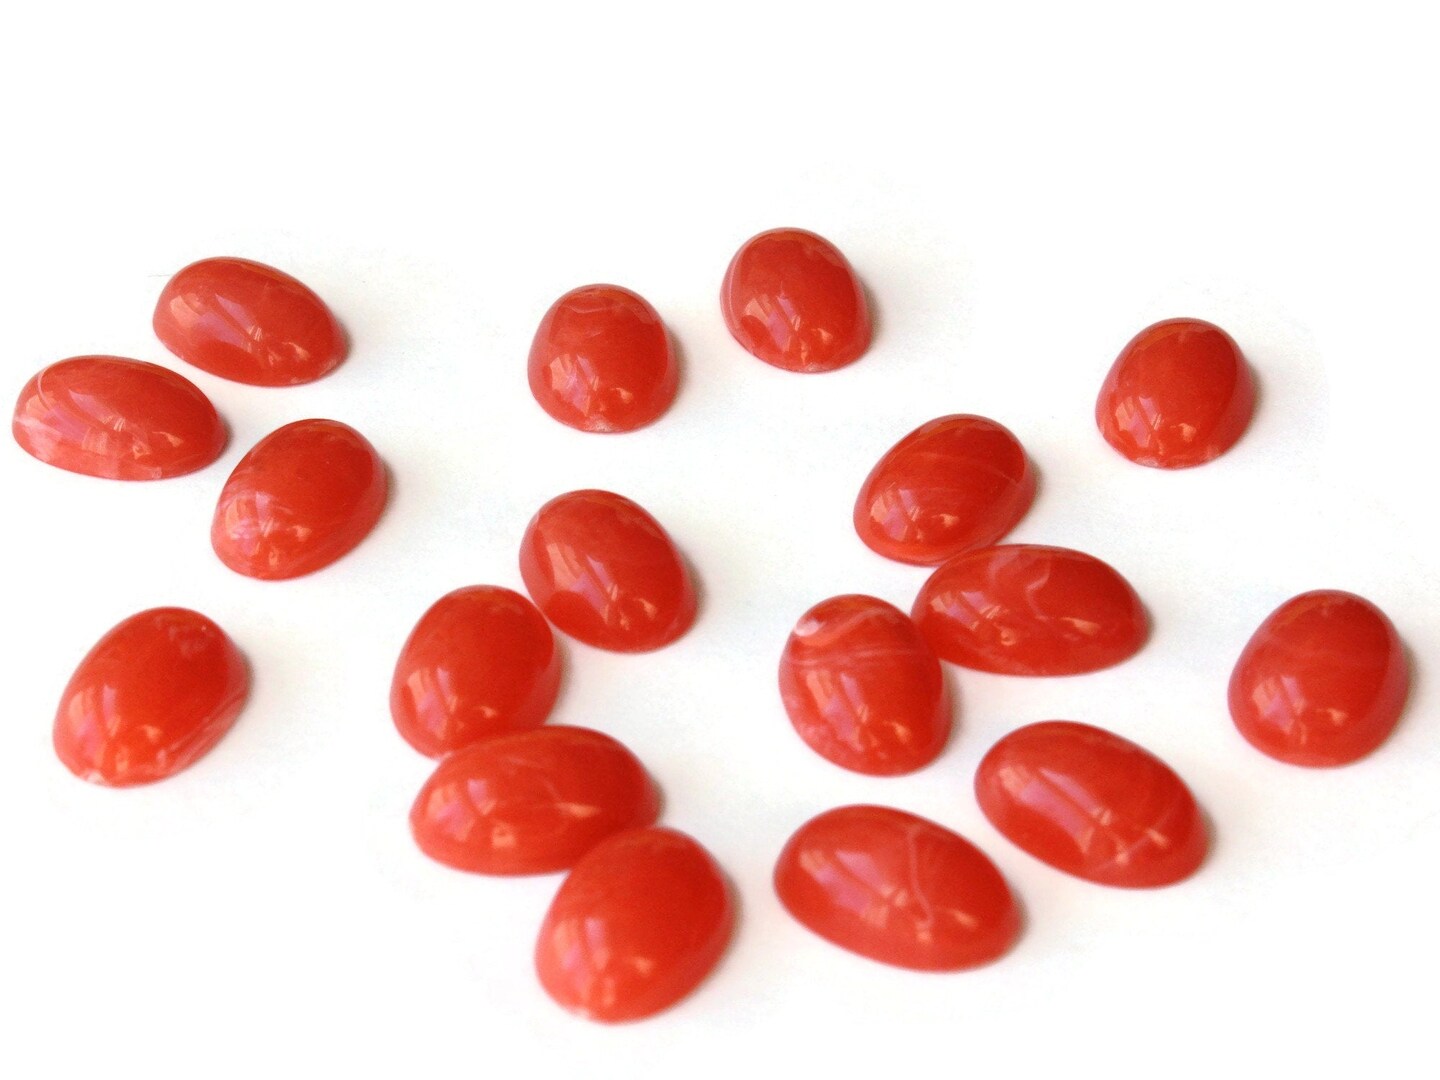 17 14mm x 10mm Red Swirling Oval Vintage Japanese Lucite Cabochons Plastic Flat Back Cabochons